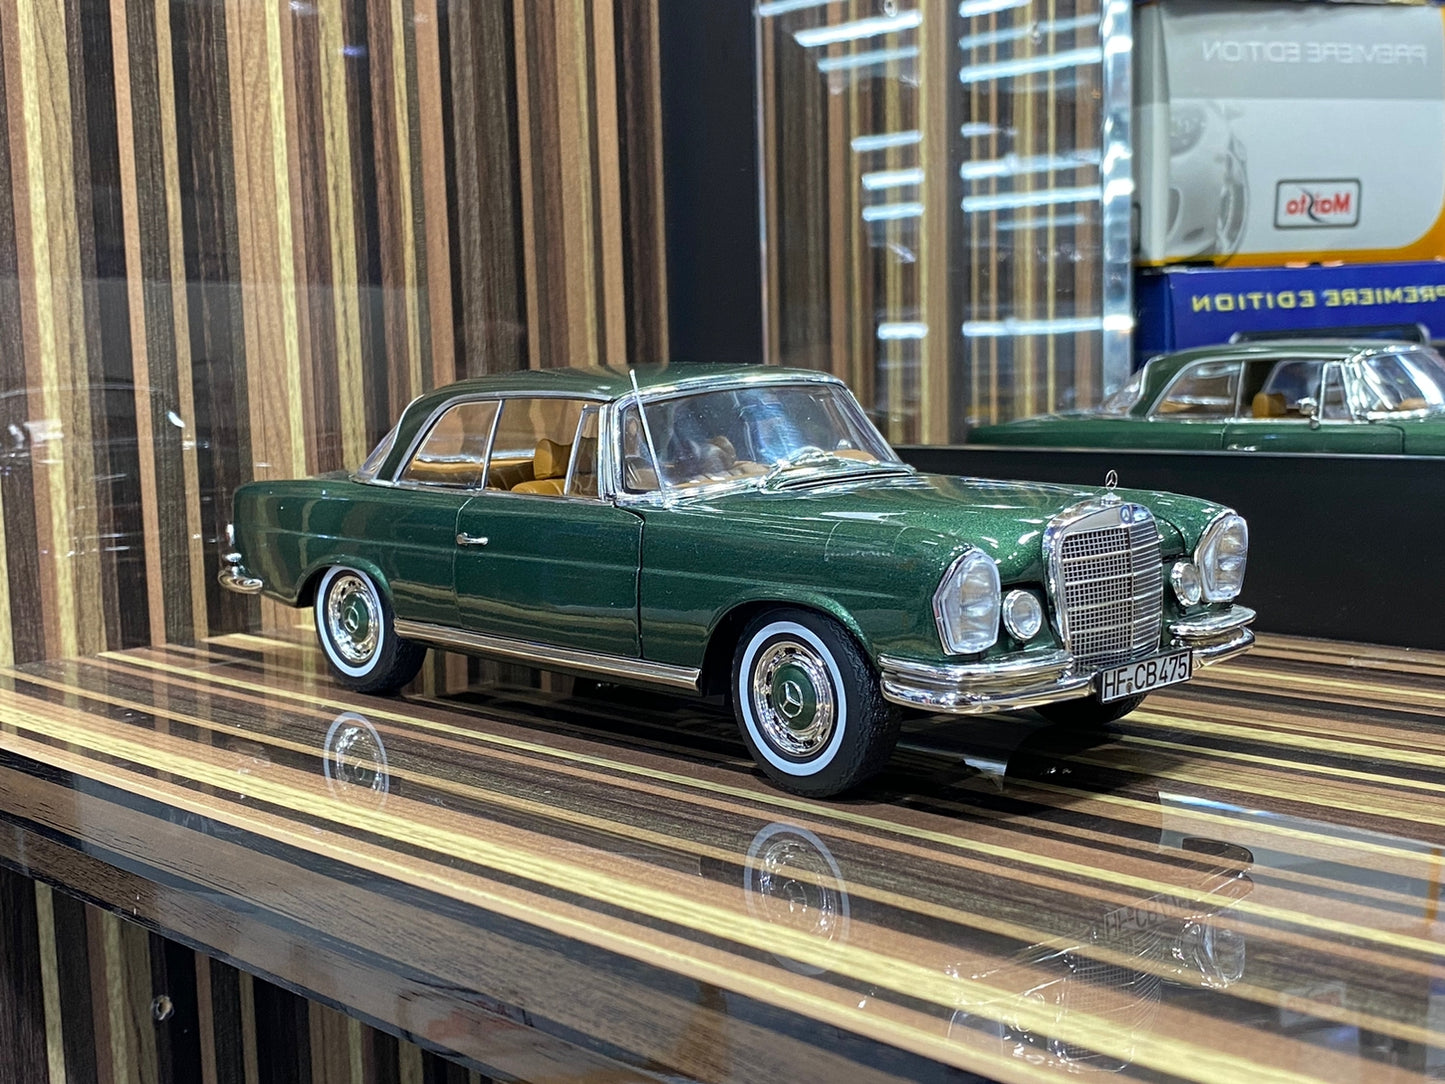 1/18 Diecast Mercedes-Benz 250 SE Coupe 1969 Green Metallic Scale Model car by Norev